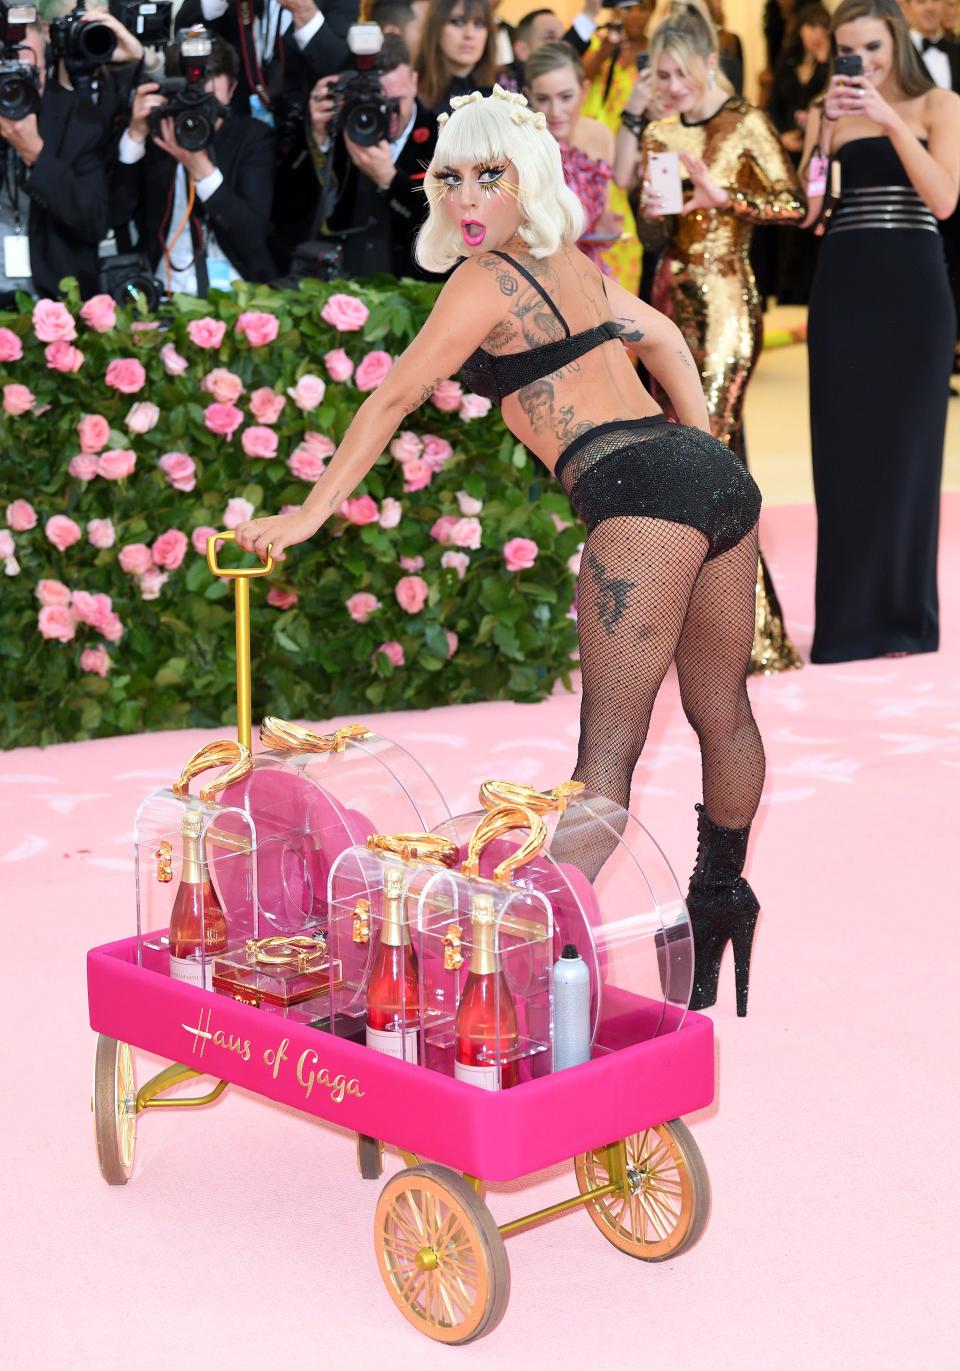 Lady Gaga poses on the Met Gala red carpet in a mesh lingerie outfit and pulling a pink wagon full of alcohol that says "Haus of Gaga" on the side.